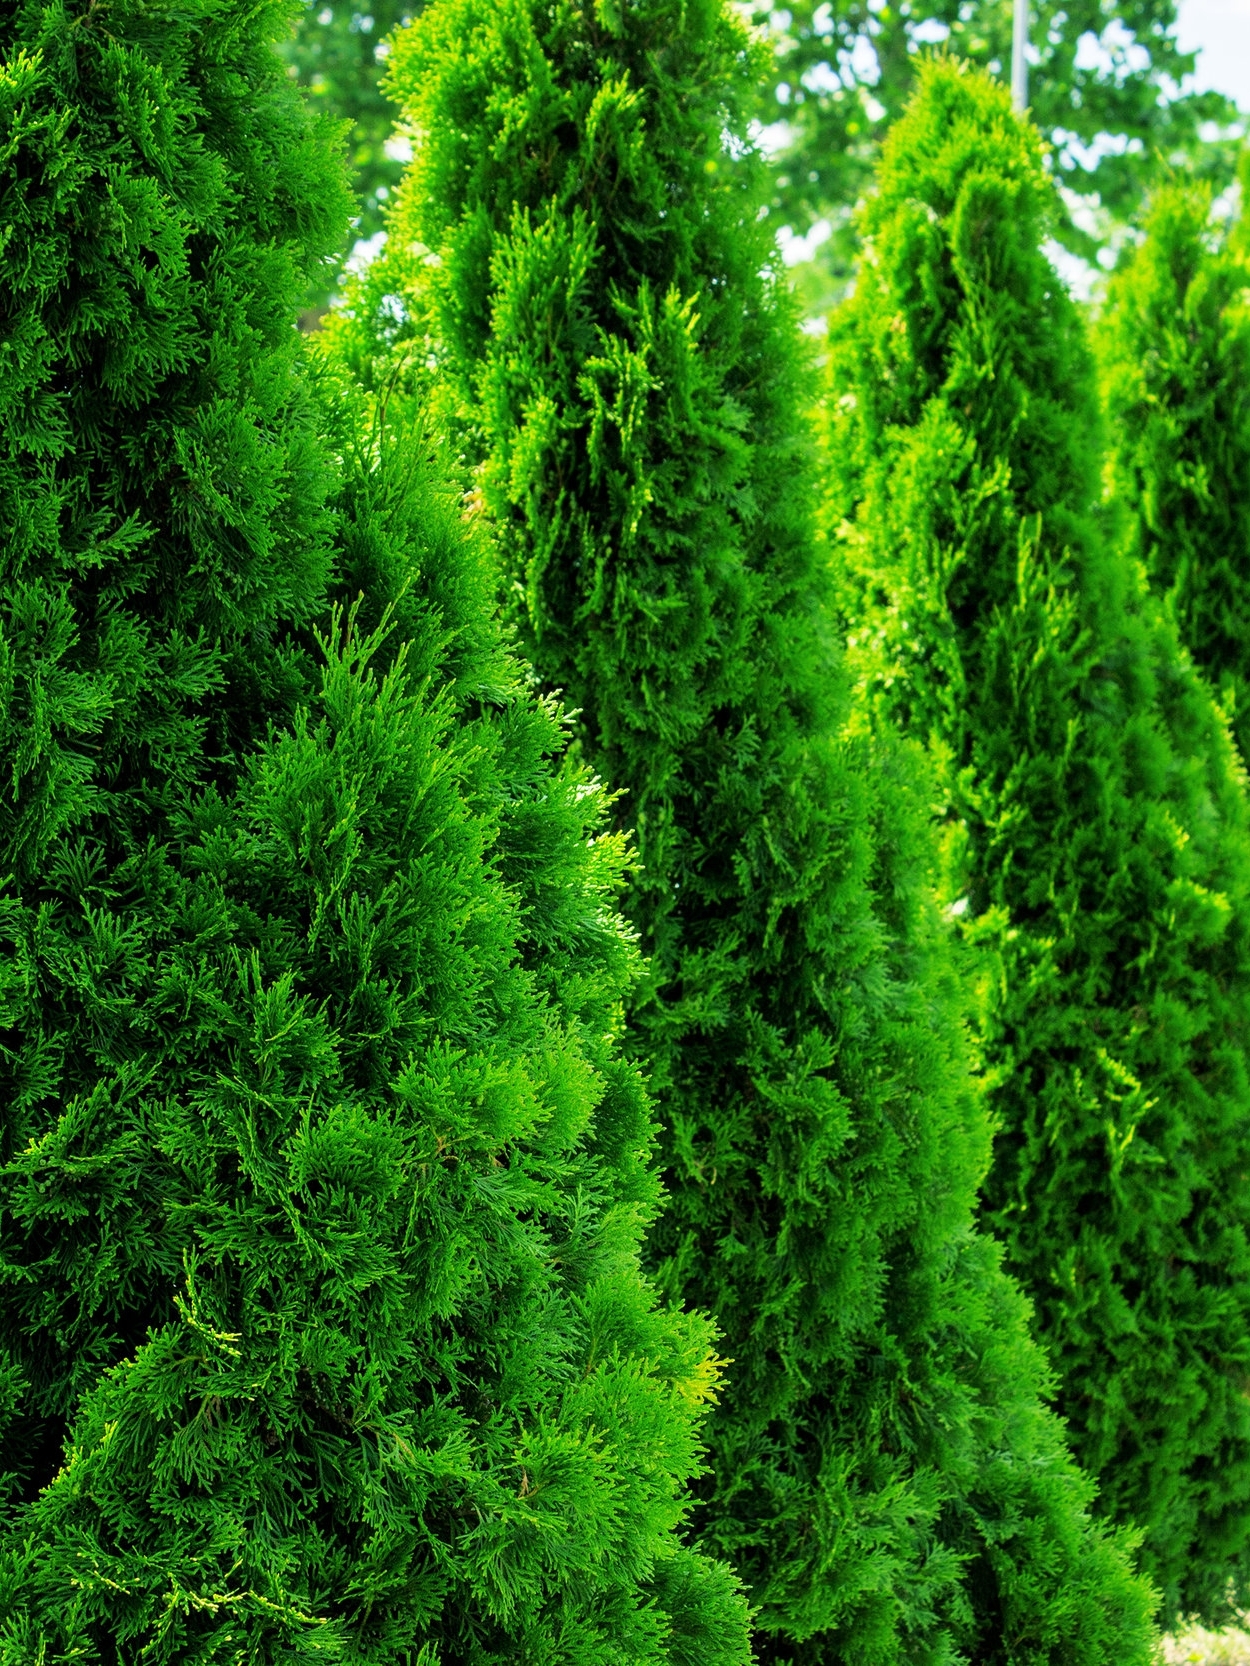 Thuja (aborvitae) - A substitute for Leyland Cypress, many people cannot tell the the Leyland from the 'Green Giant' arborvitae. 'Green Giant' or 'Emerald Green' is a better fit in smaller landscapes.Zone: 5-8Size: 30'-40' x 15'-20, or more narrow varieties 10'-12' x 3'Cultivars suggested: 'Green Giant', 'Emerald Green', 'Yellow Ribbon'Culture: Full sun to part shadeGrowth rate: Medium to FastPests and Disease: No serious issue, sometimes scale or bagworms*'Green Giant' pictured